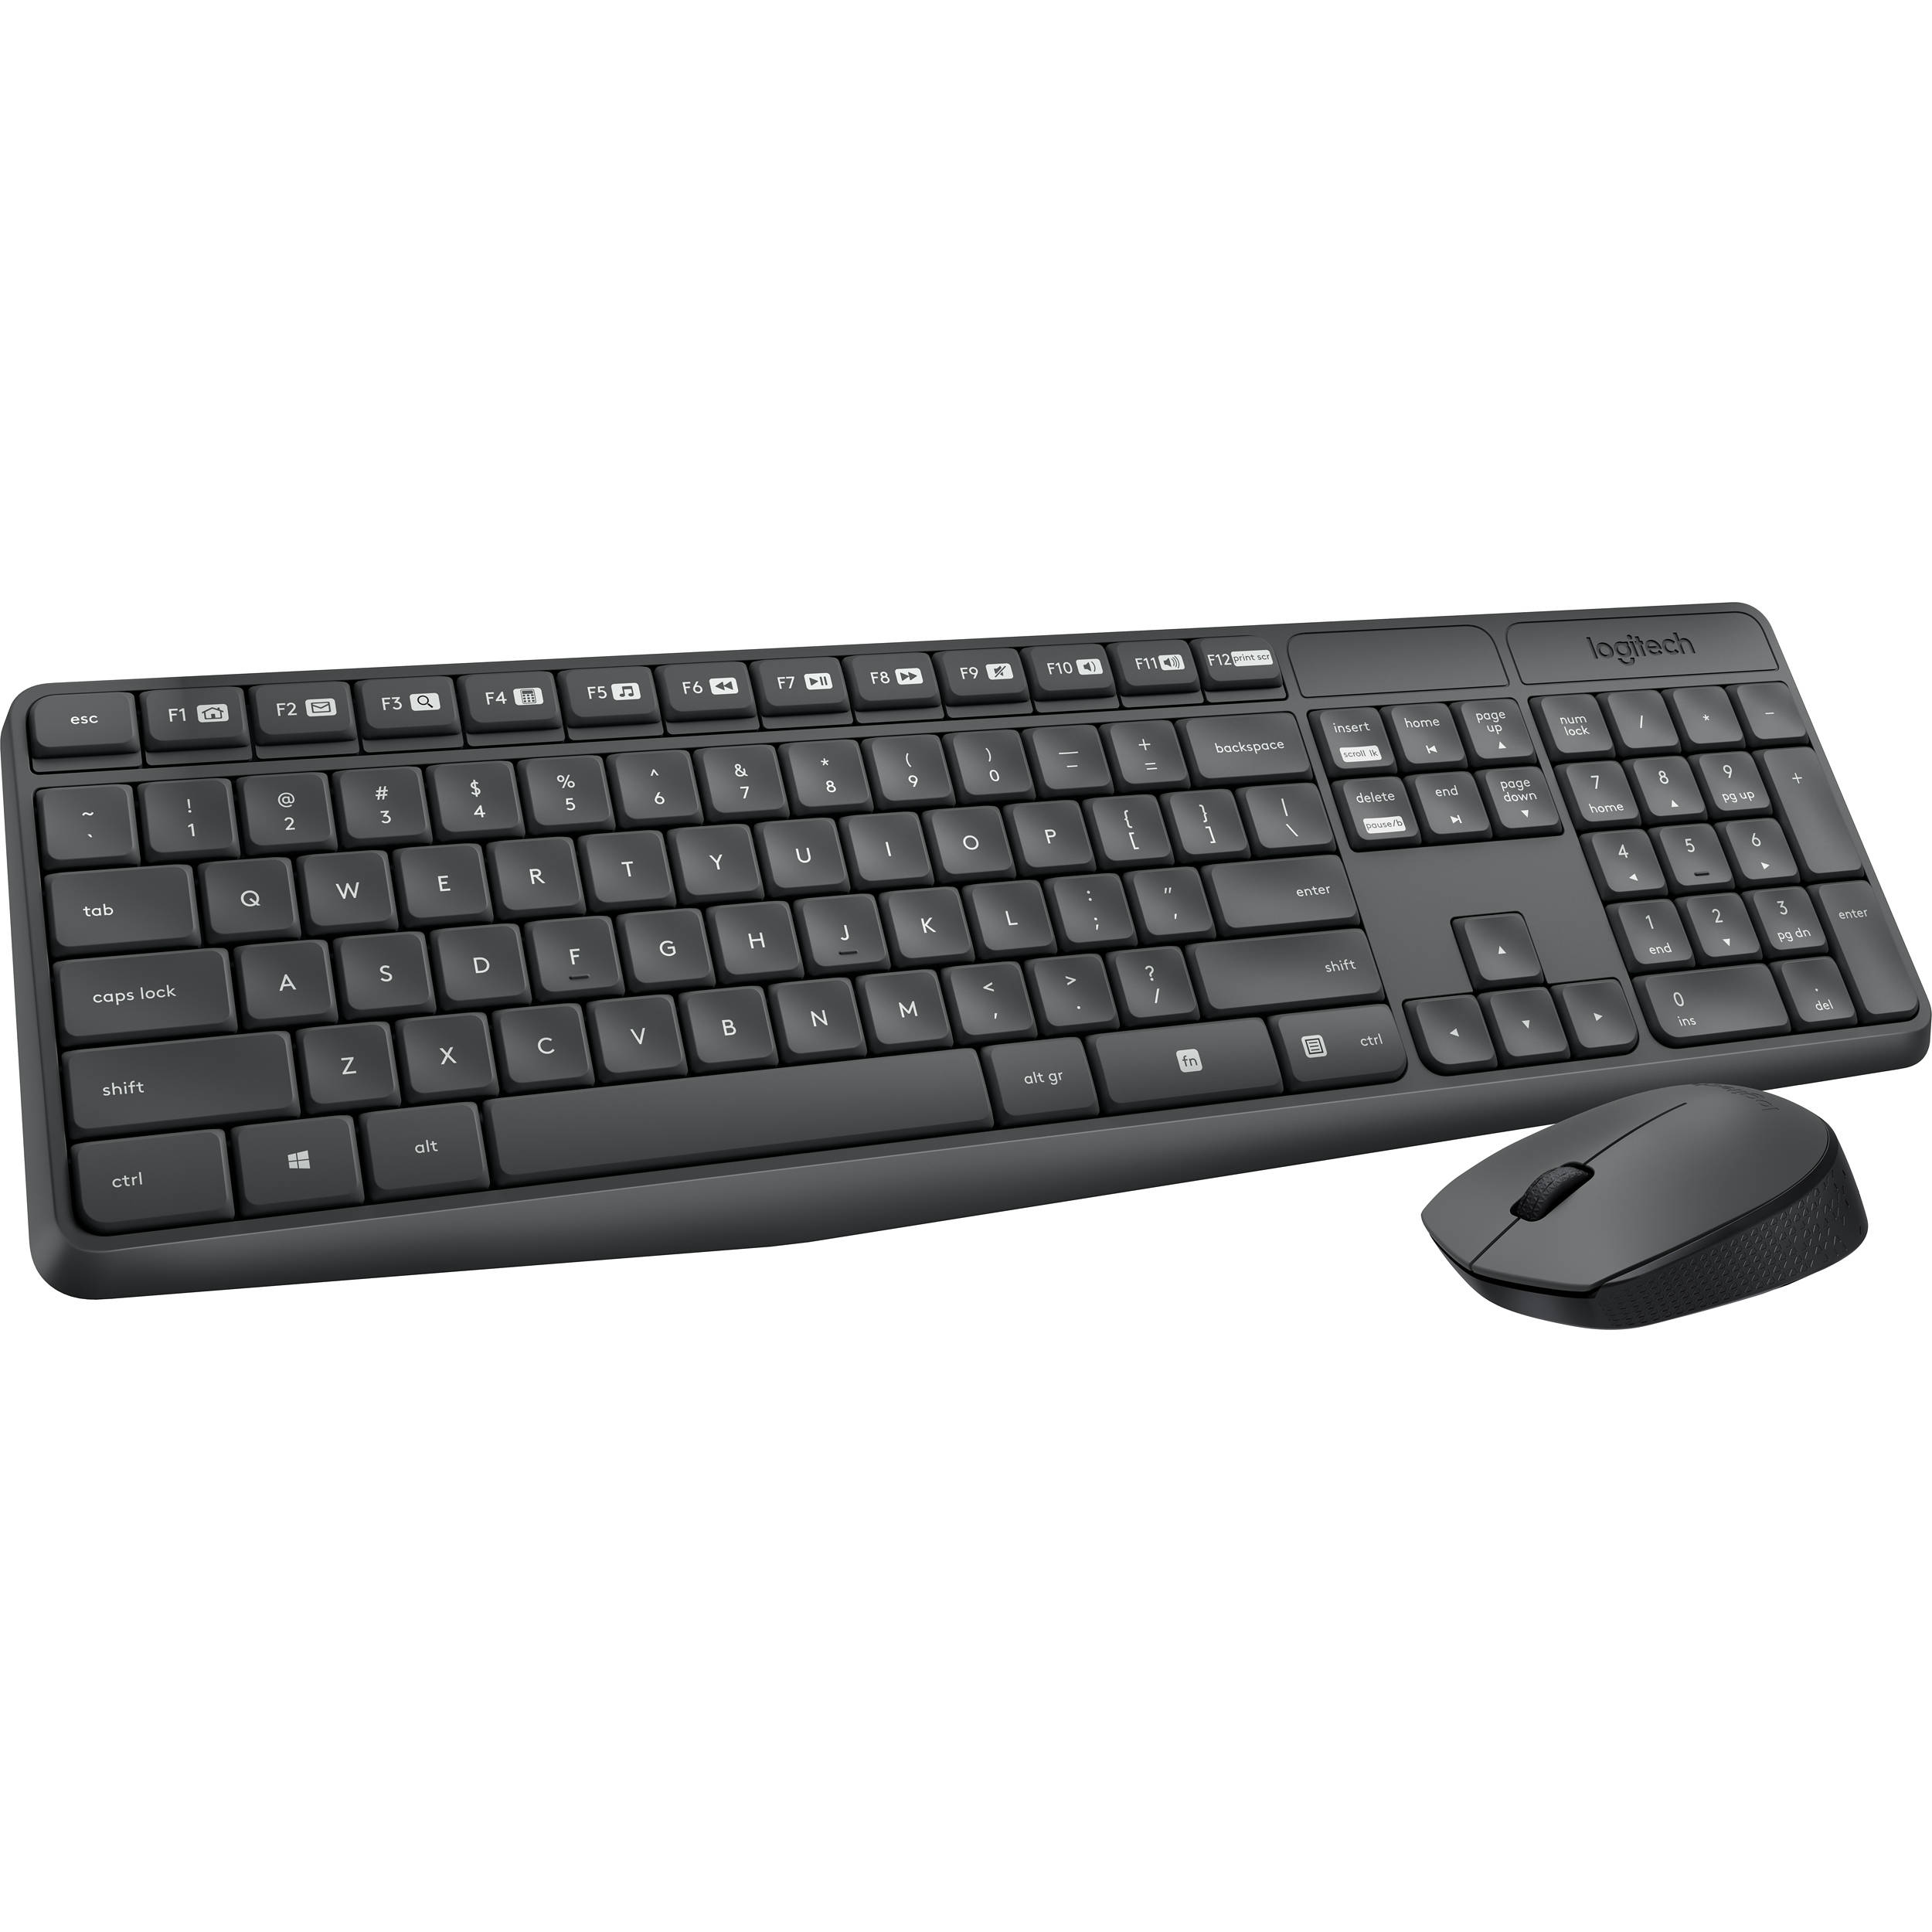 The Advantages of Using a Wireless Keyboard and Mouse: Enhance Your Productivity and Mobility